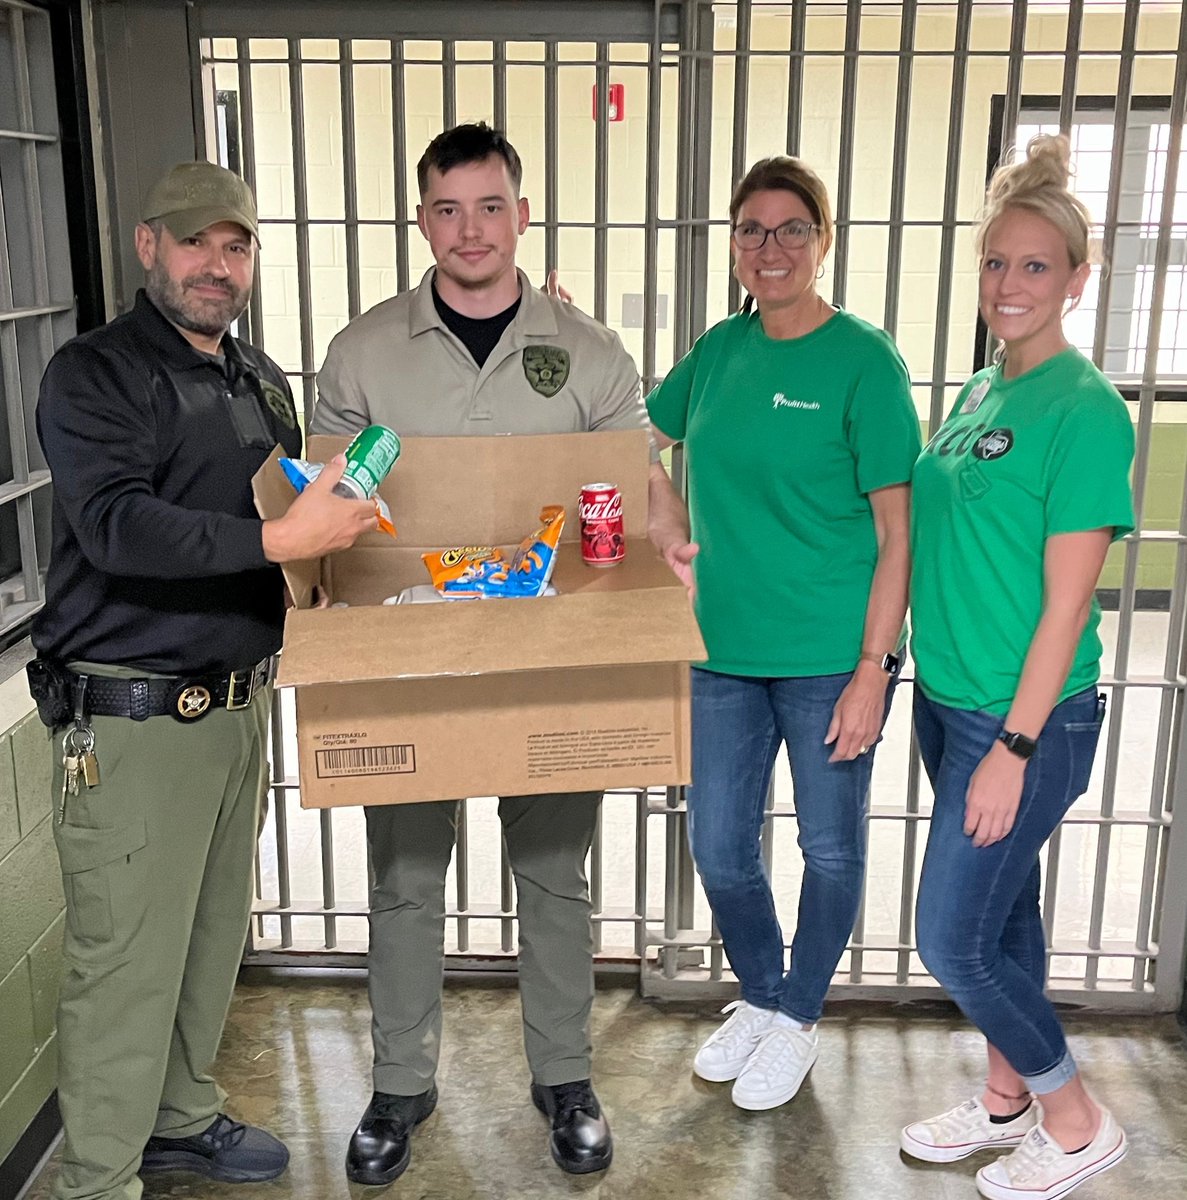 After a major storm passed through their community, the team at PruittHealth – Blue Ridge (GA) delivered more than 300 meals to the first responders who were leading relief efforts in the area. Thank you to everyone who pitched in to help.
#PruittHealth #OneHeart